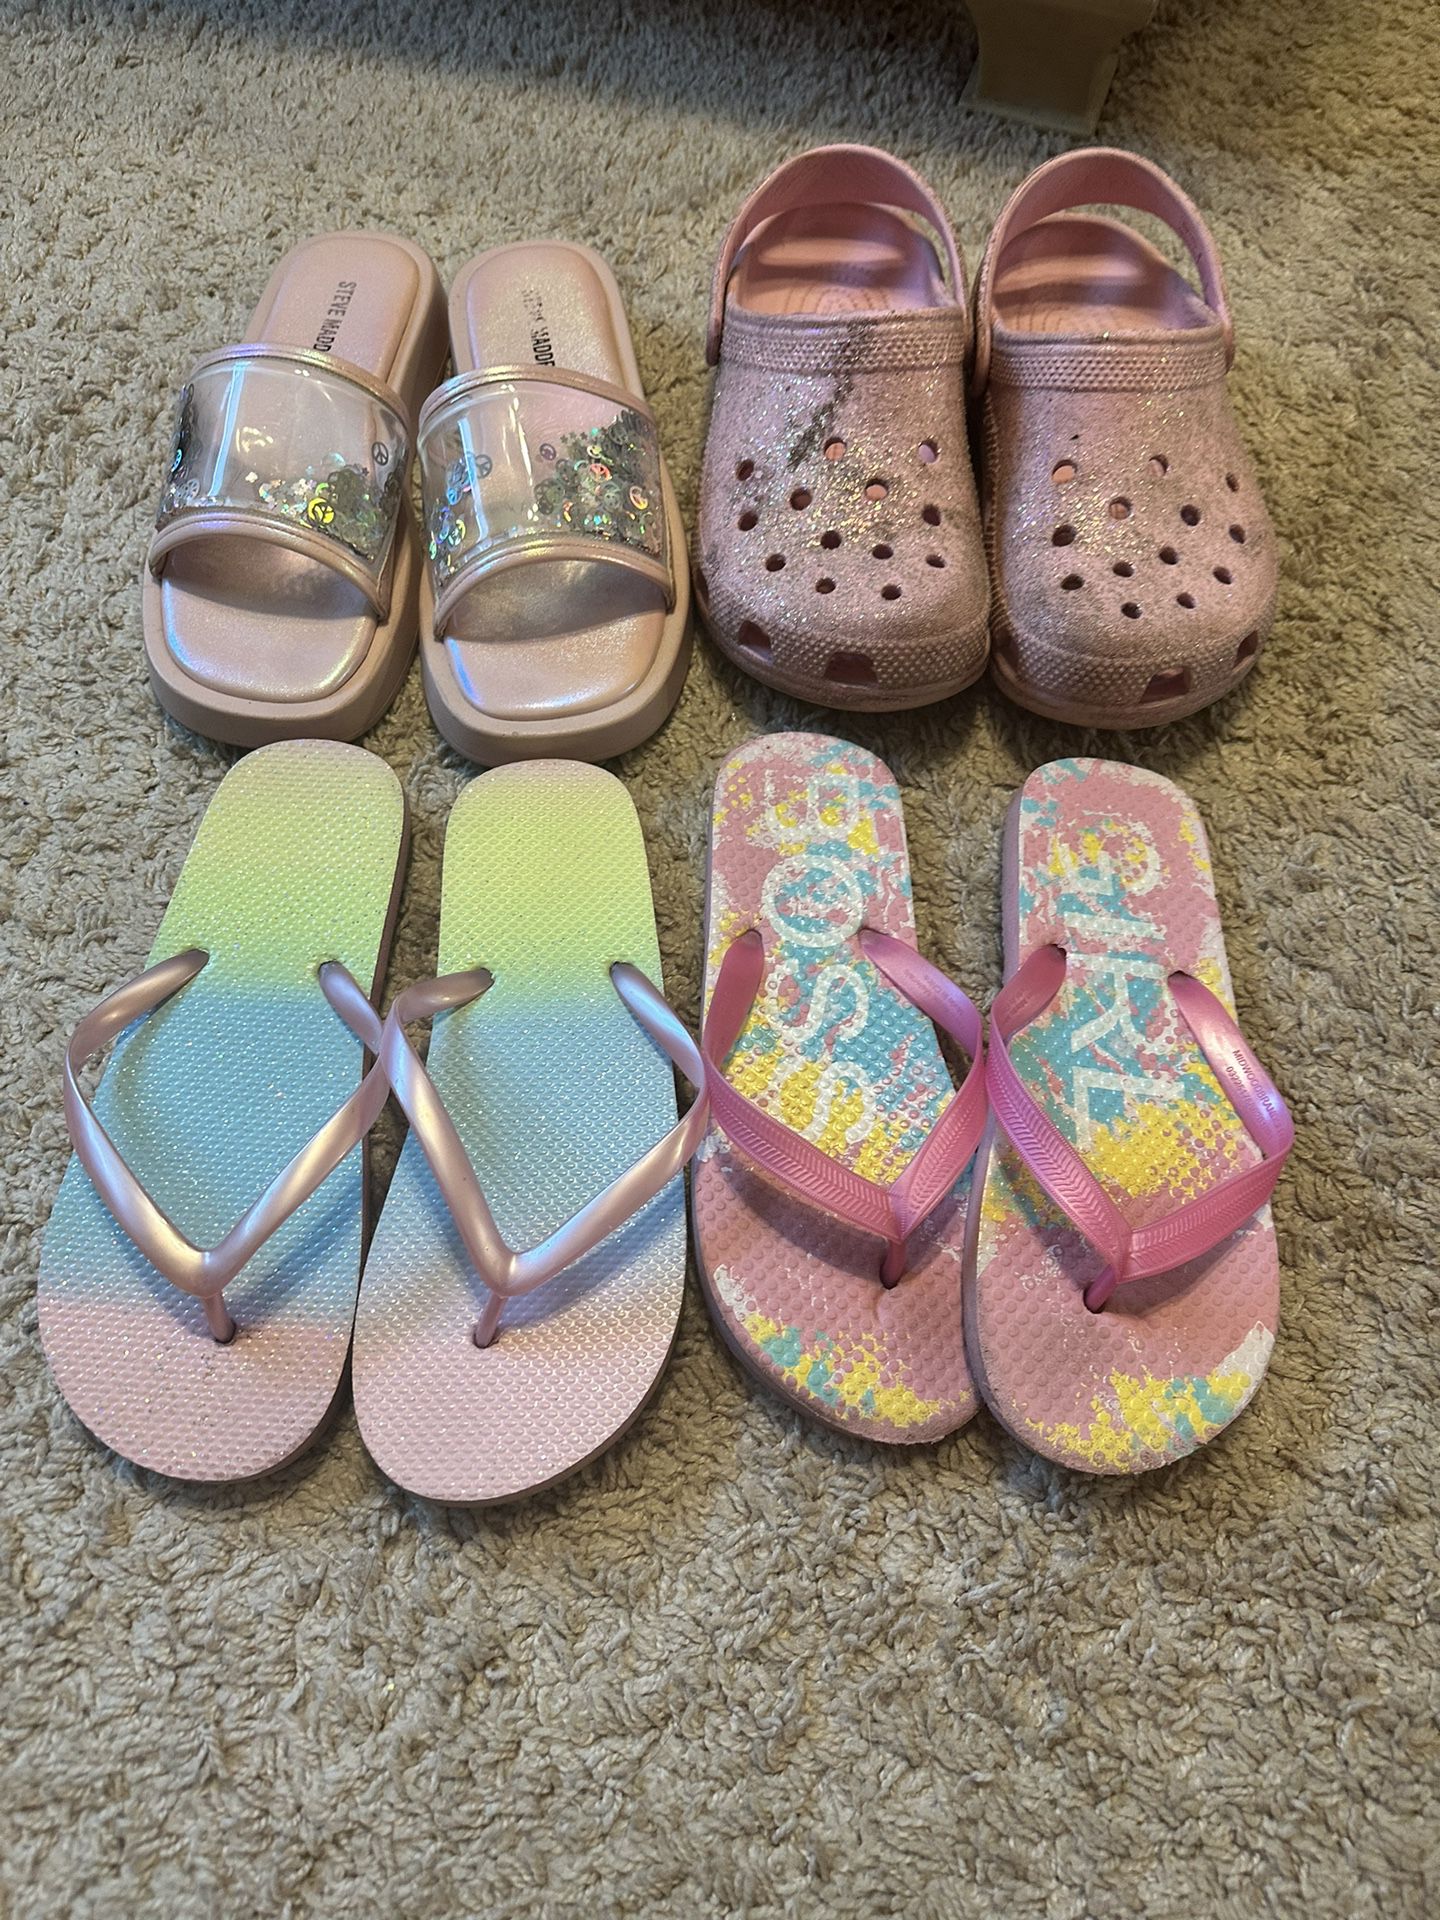 Girl Sandals - FREE